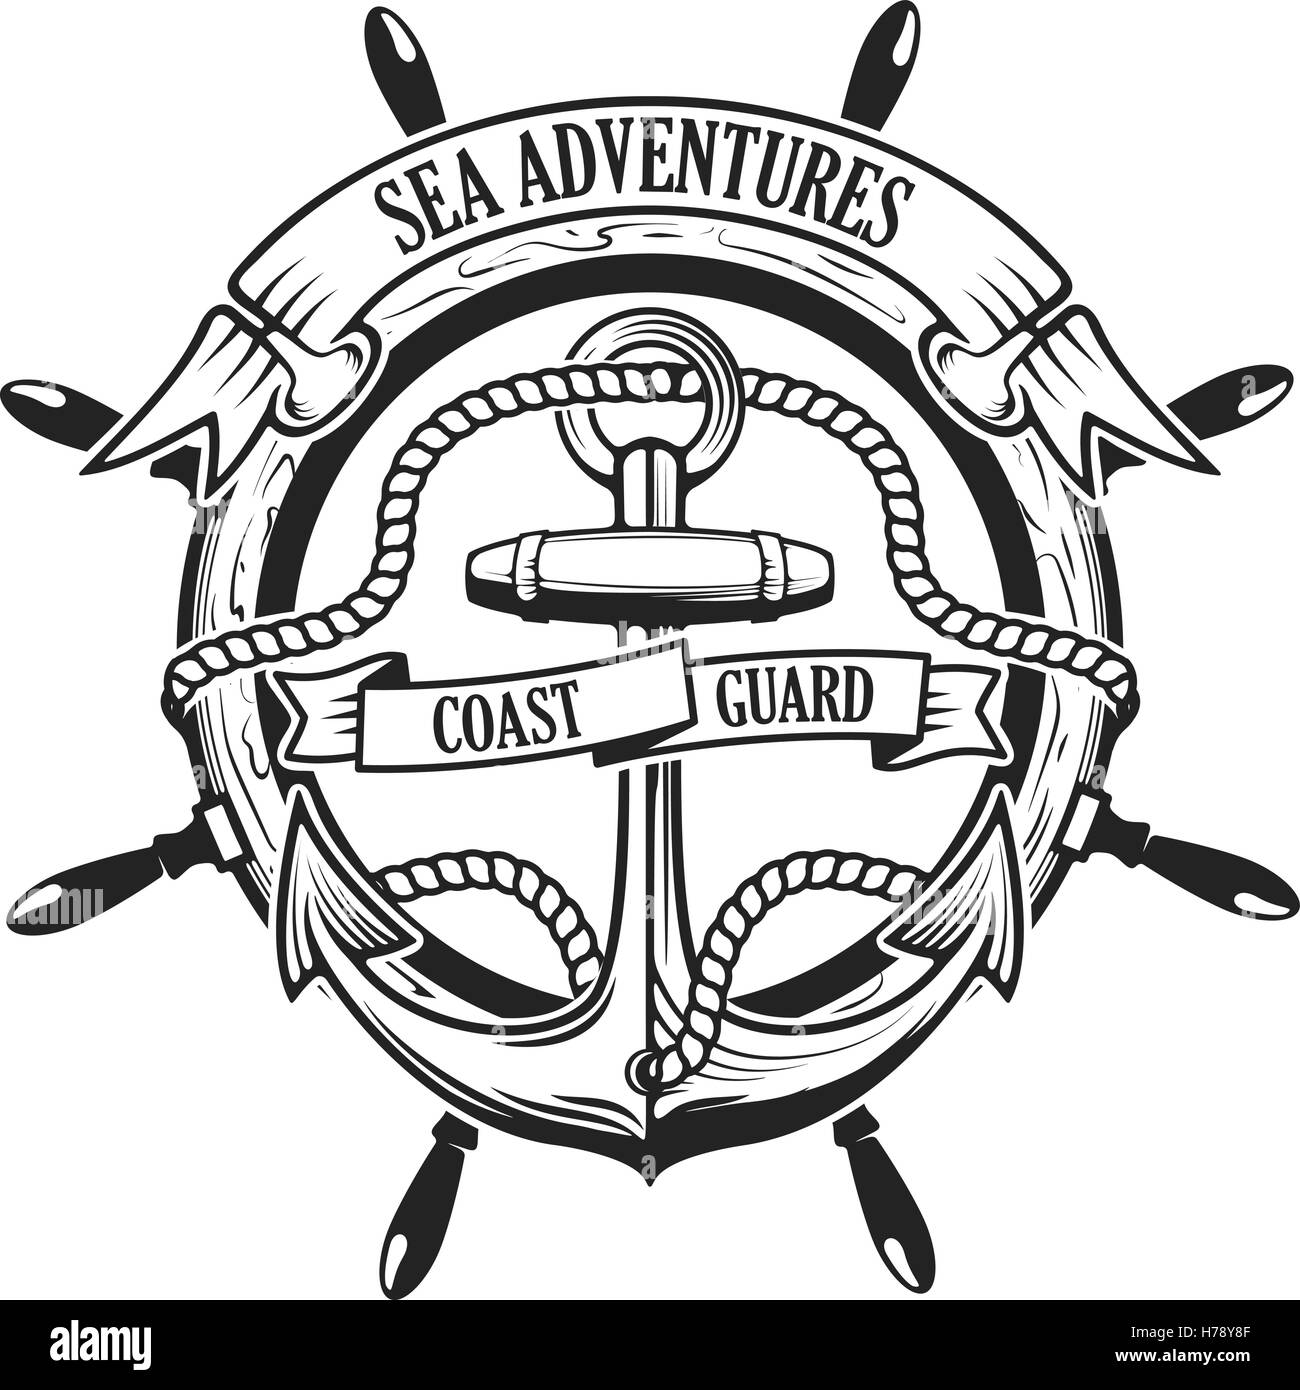 Sea adventures. Coast guard. Anchor with rope and ribbons on background with steering wheel. Ship helm. Design element for logo, Stock Vector